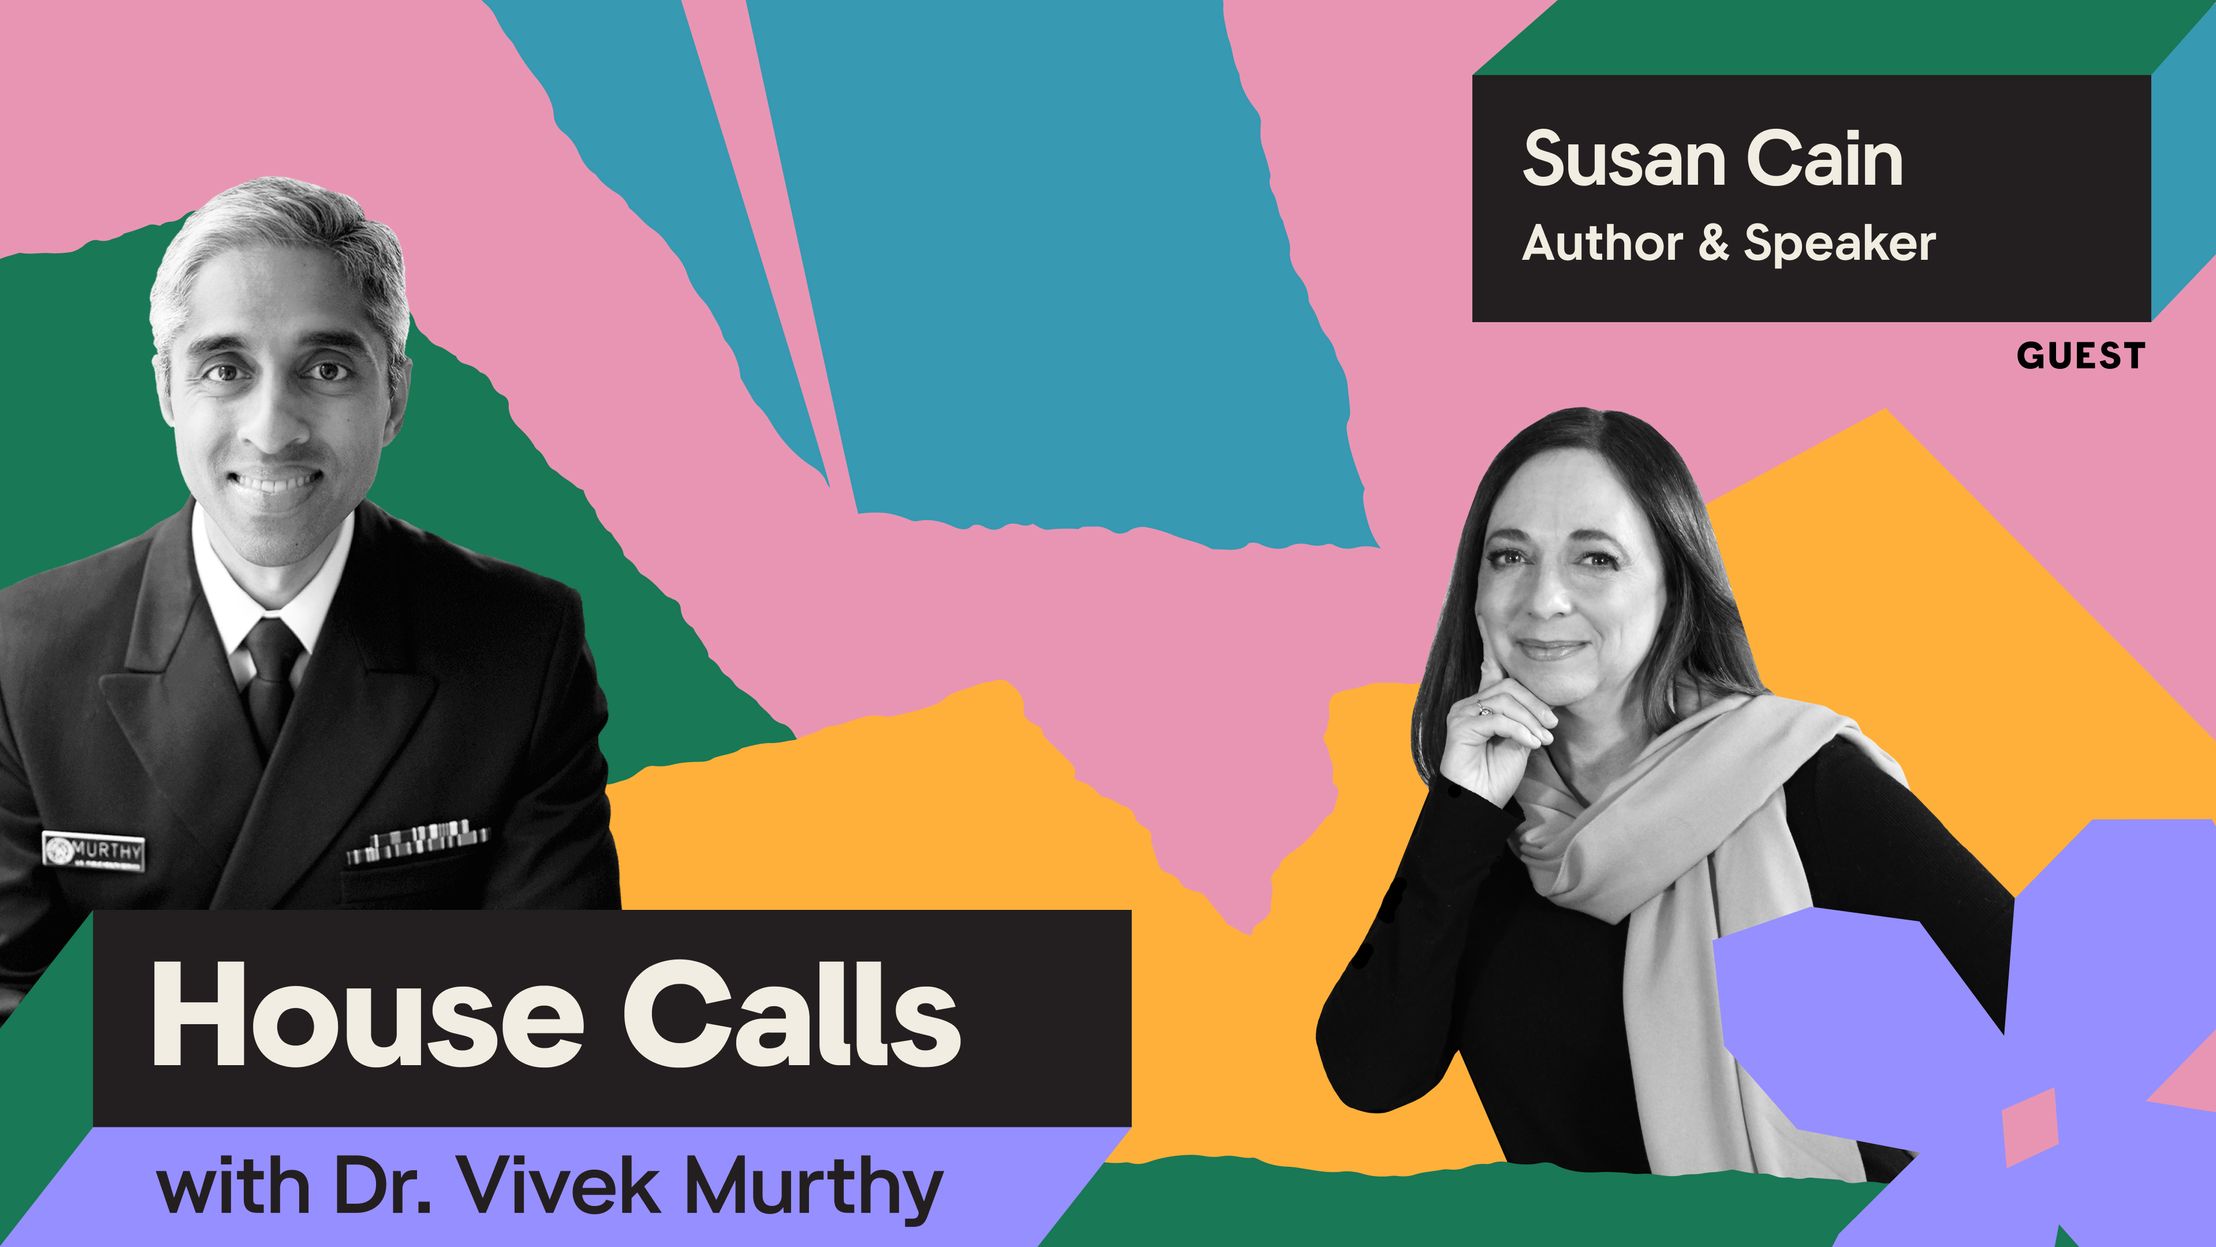 Black and white portraits of Surgeon General Vivek Murthy and Susan Cain with a colorful background.